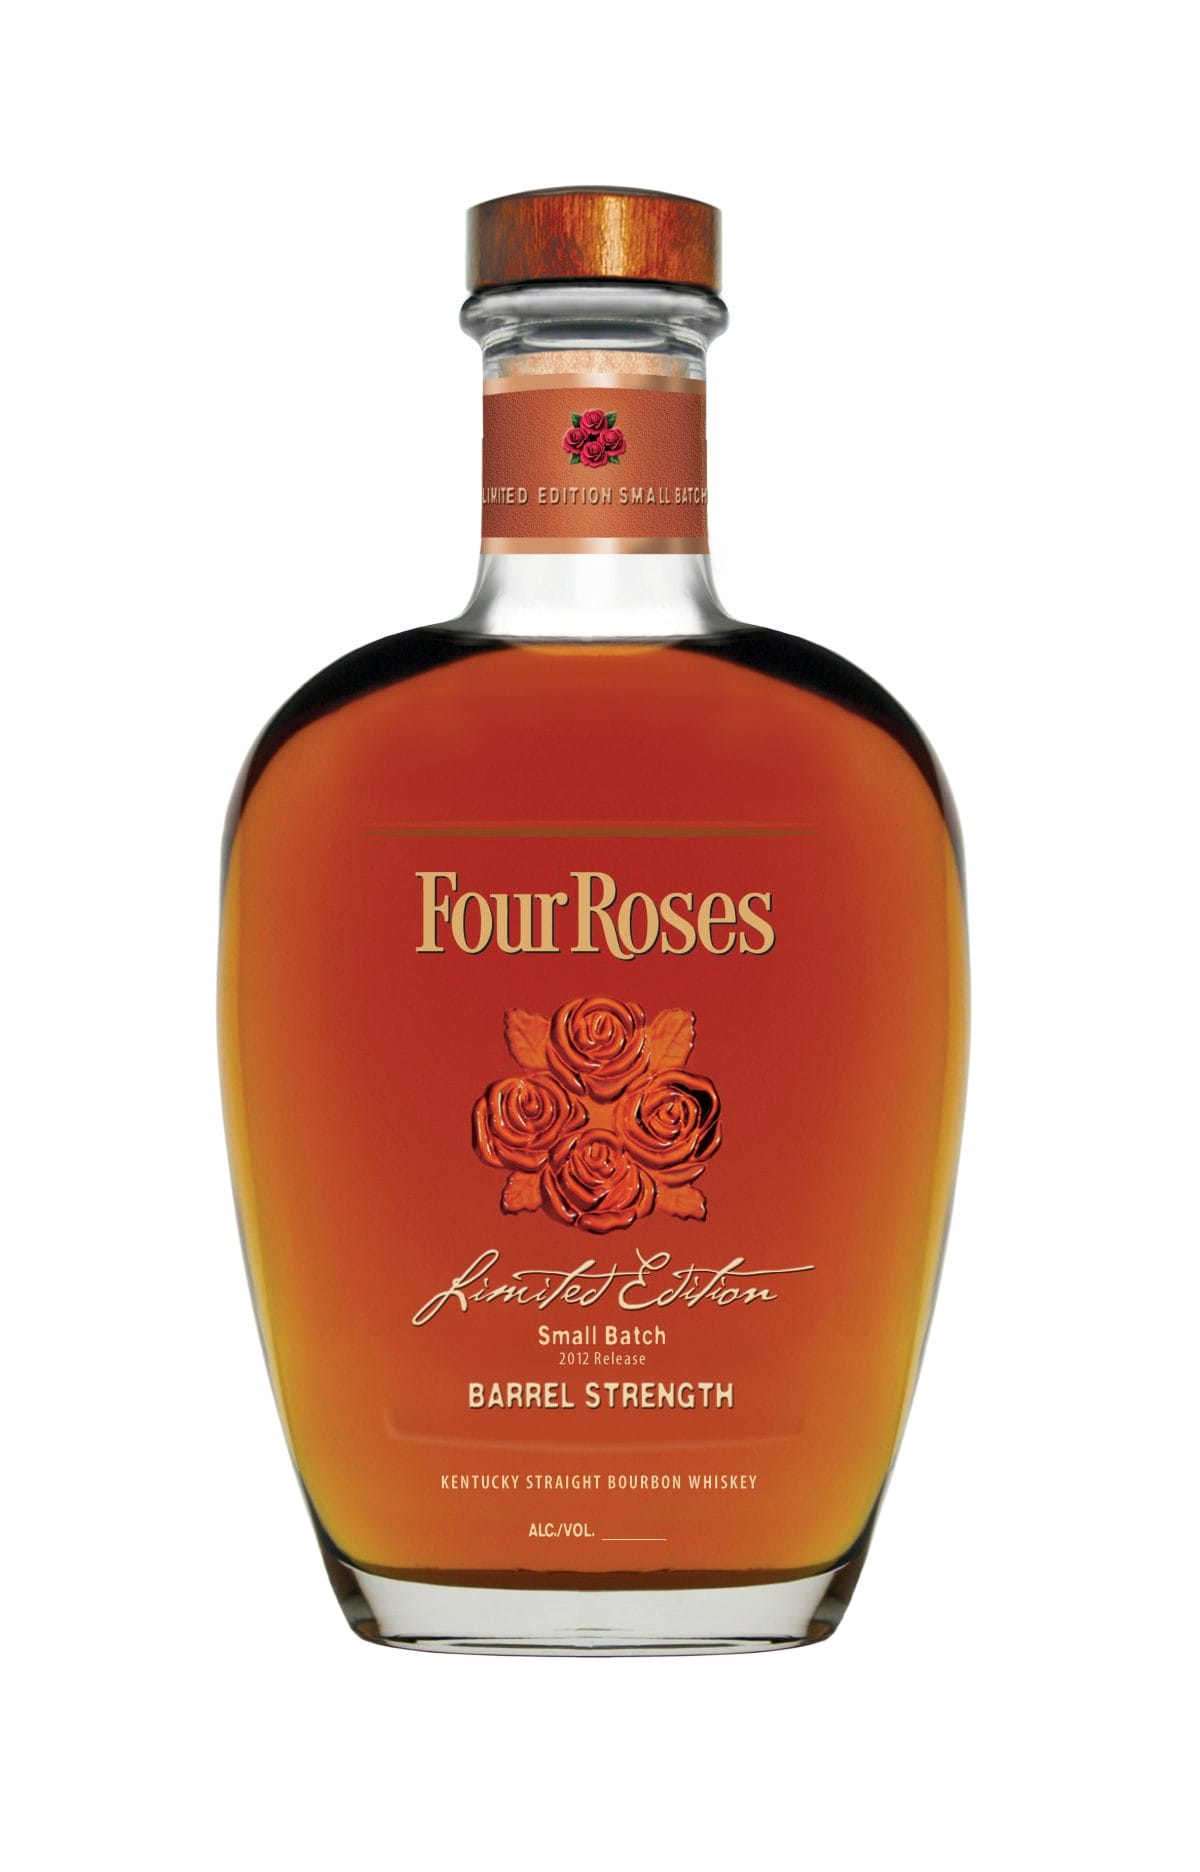 Four Roses Limited Edition Small Batch 2012